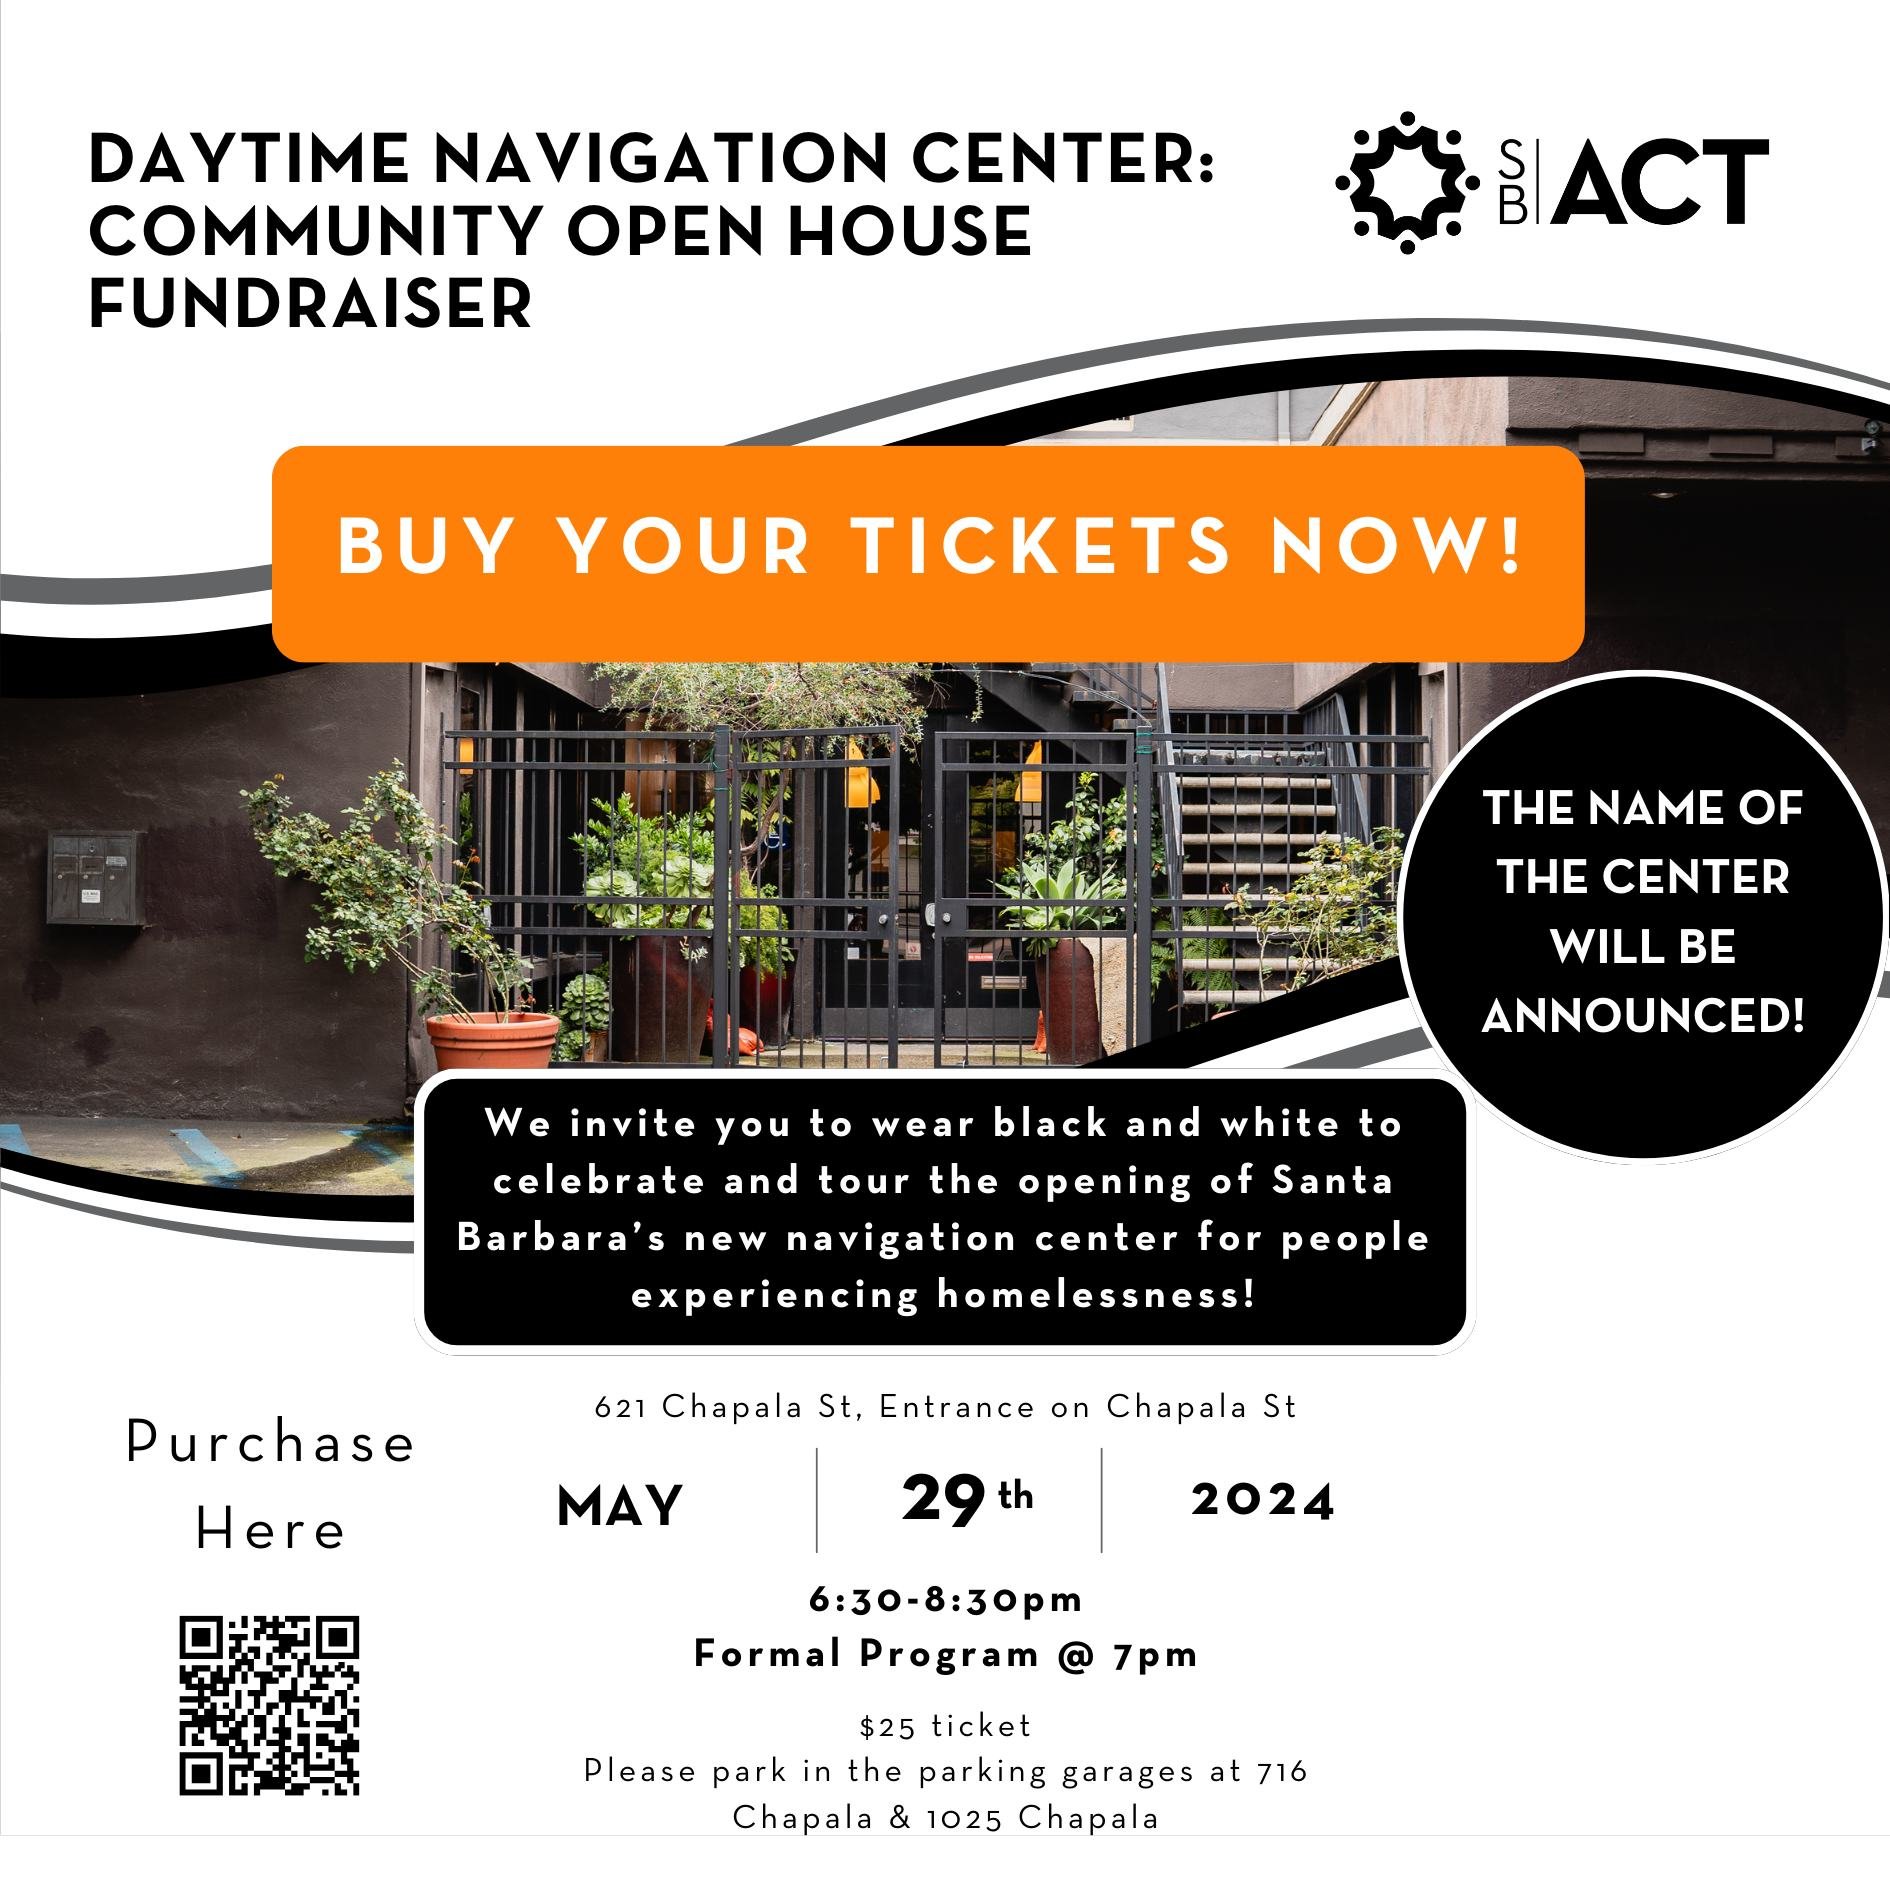 REMINDER: Purchase your Community Open House Fundraiser tickets for the new Daytime Navigation Center for people experiencing homelessness in downtown Santa Barbara! Tickets are $25. The event will be on May 29th from 6:30-7:30pm at 621 Chapala Stree